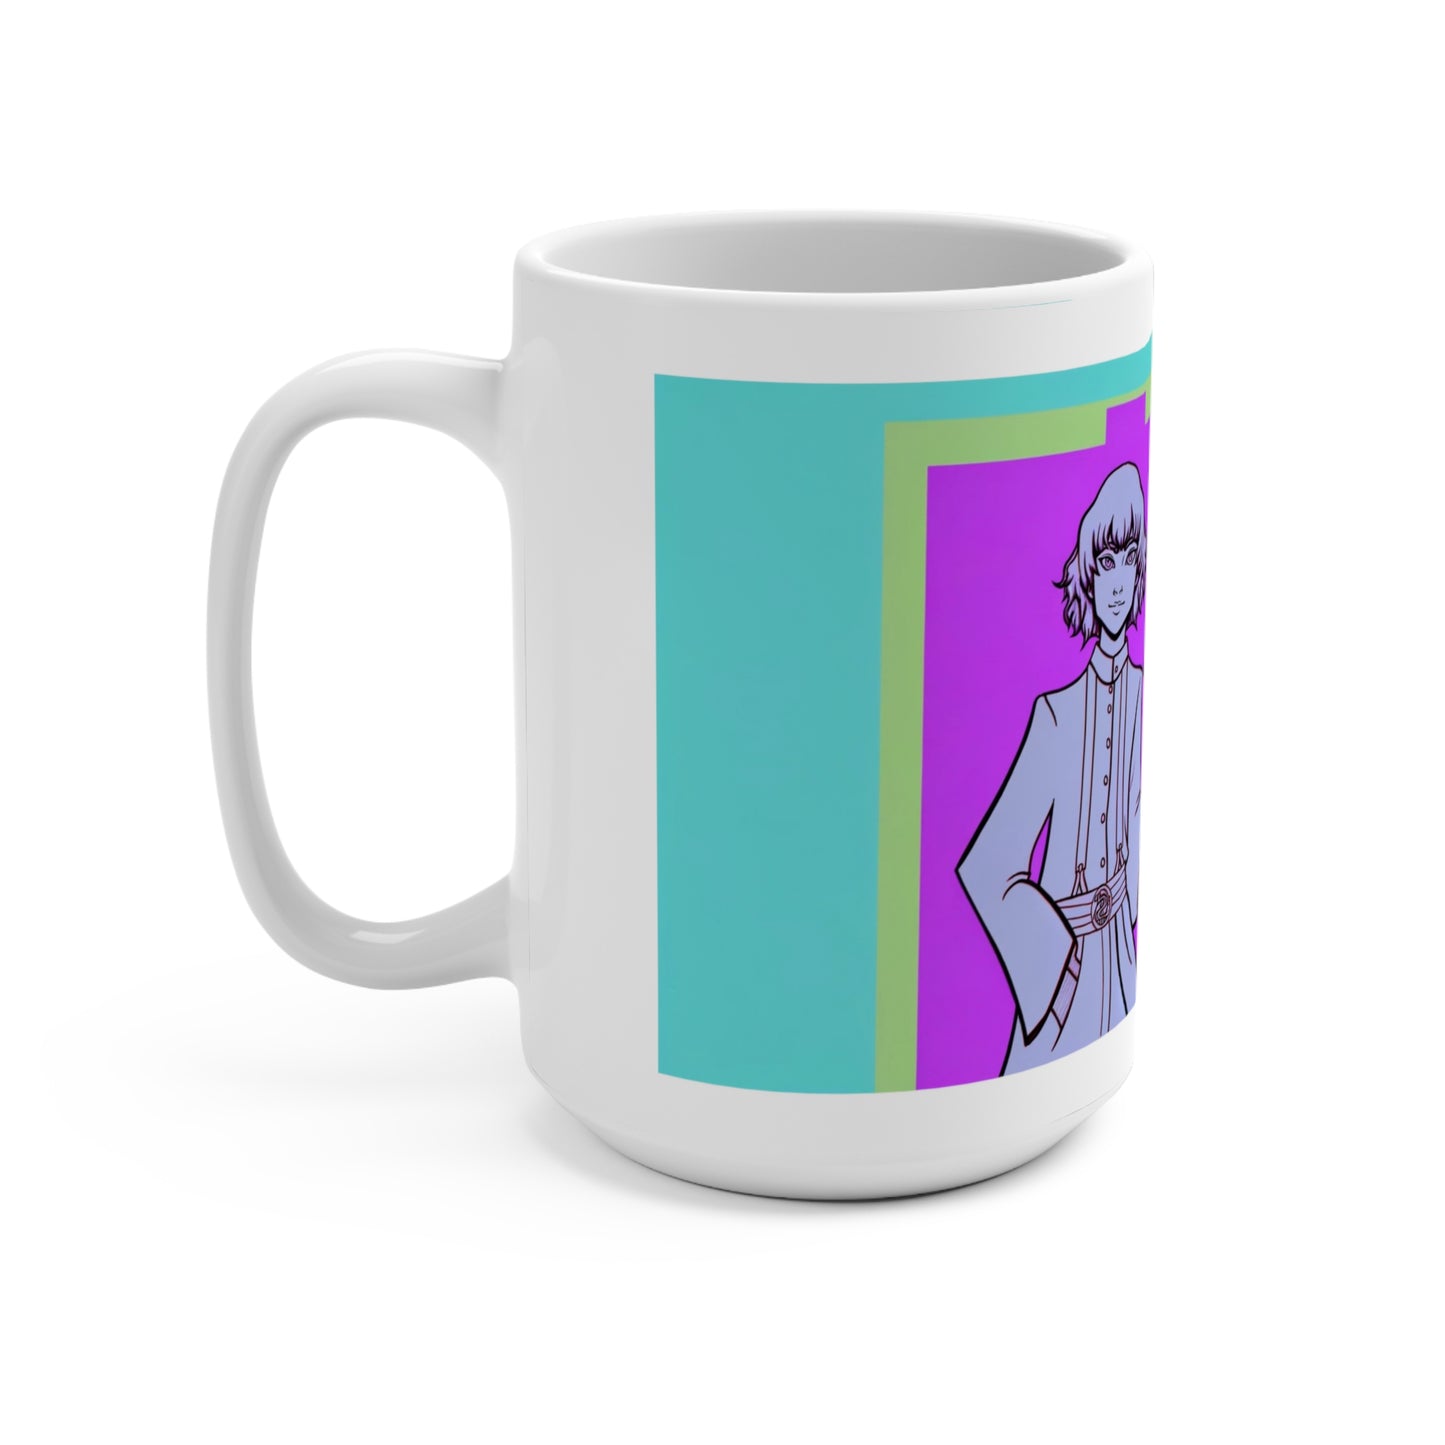 Trust Women! Inspirational Anime-Style Statement Coffee Mug (15oz): Activist, Protest, Demand, Equality! Look Good Doing it!